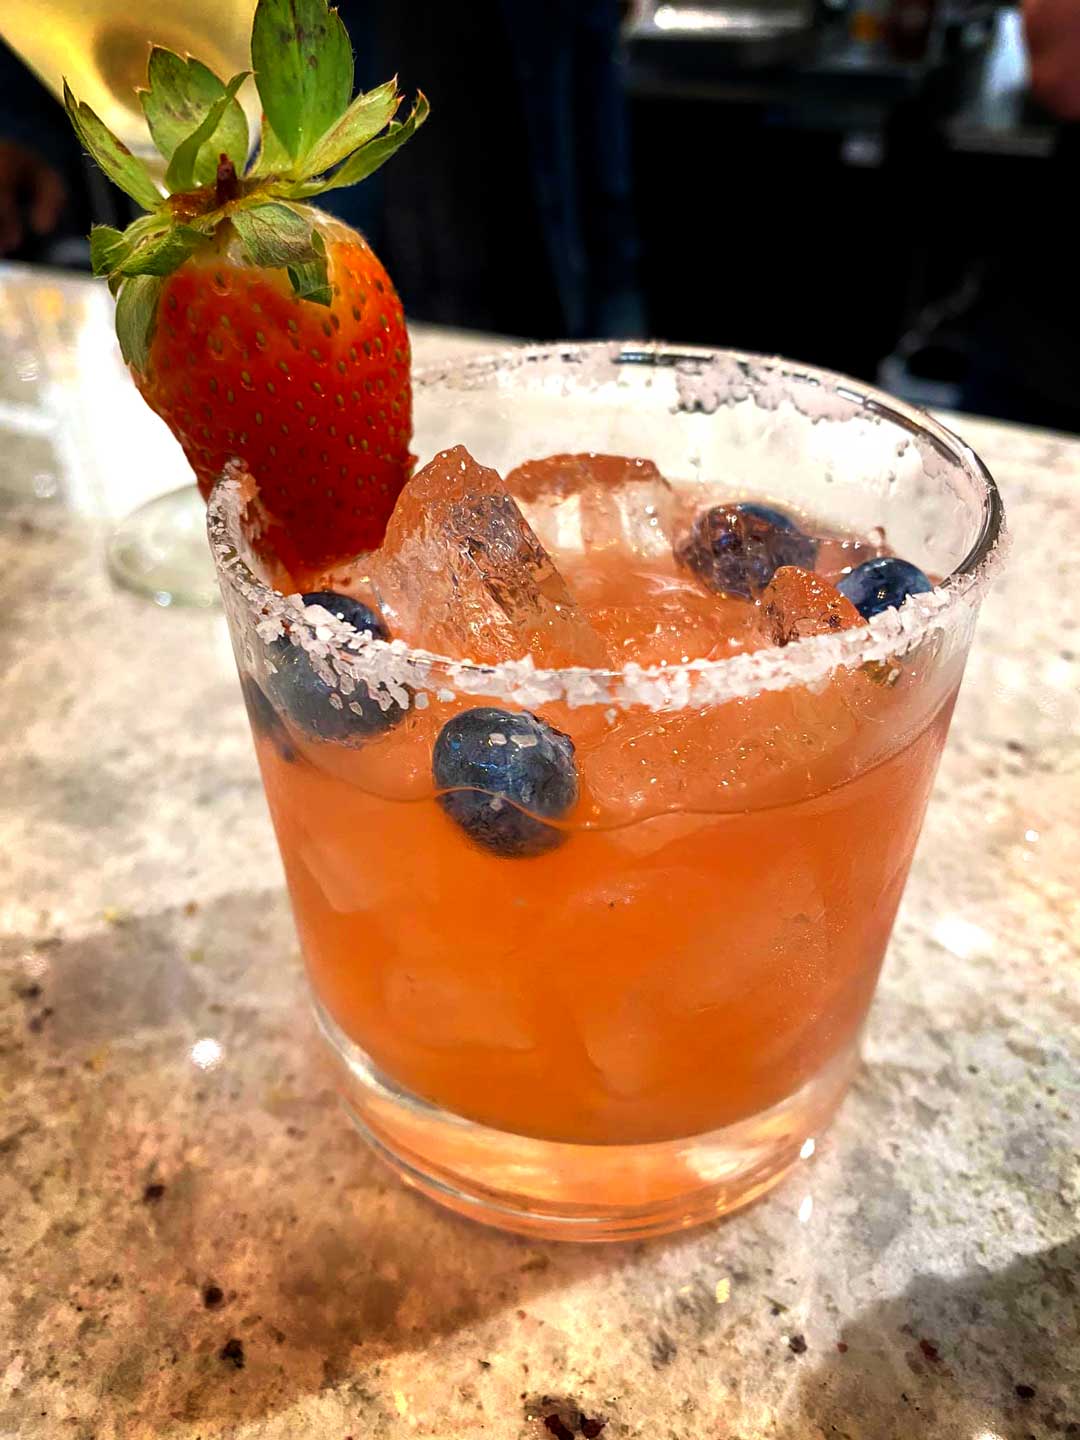 Strawberry Cocktail at 2020 Market